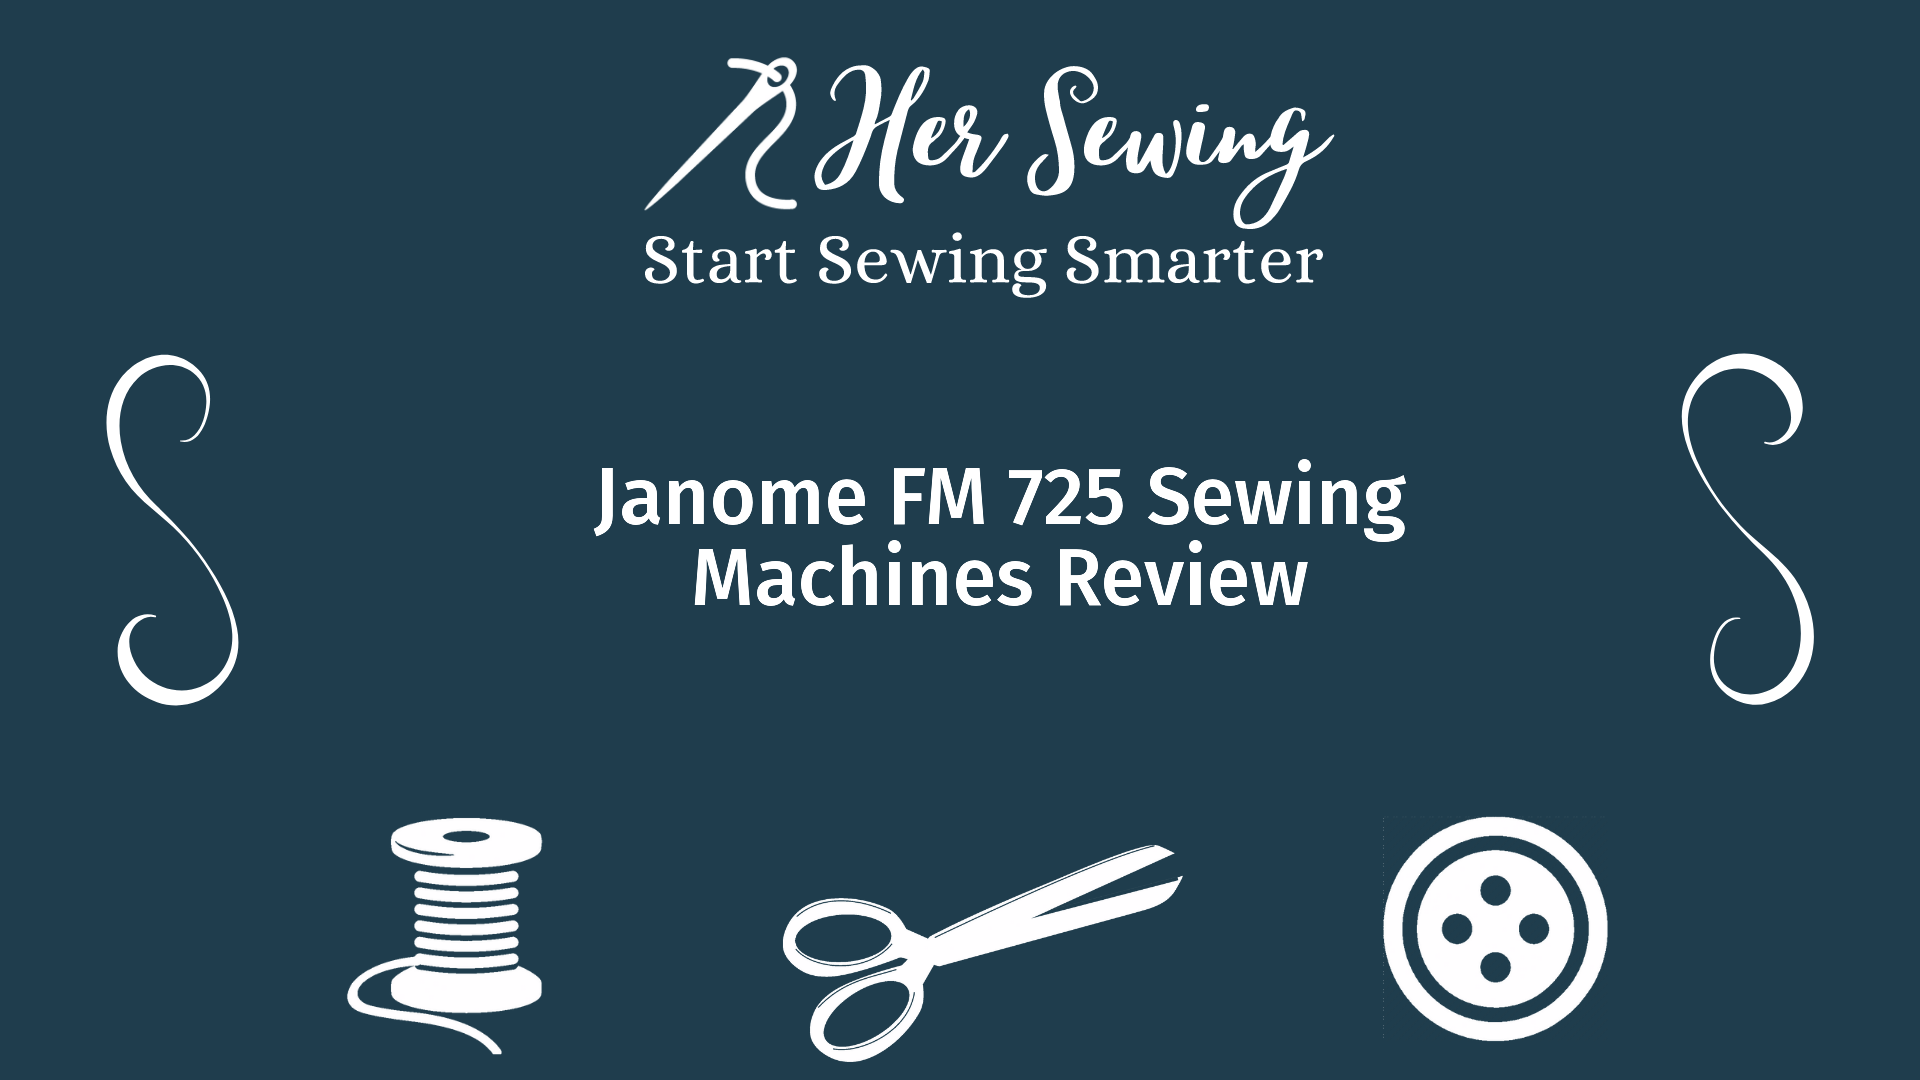 Janome FM 725 Sewing Machines Review